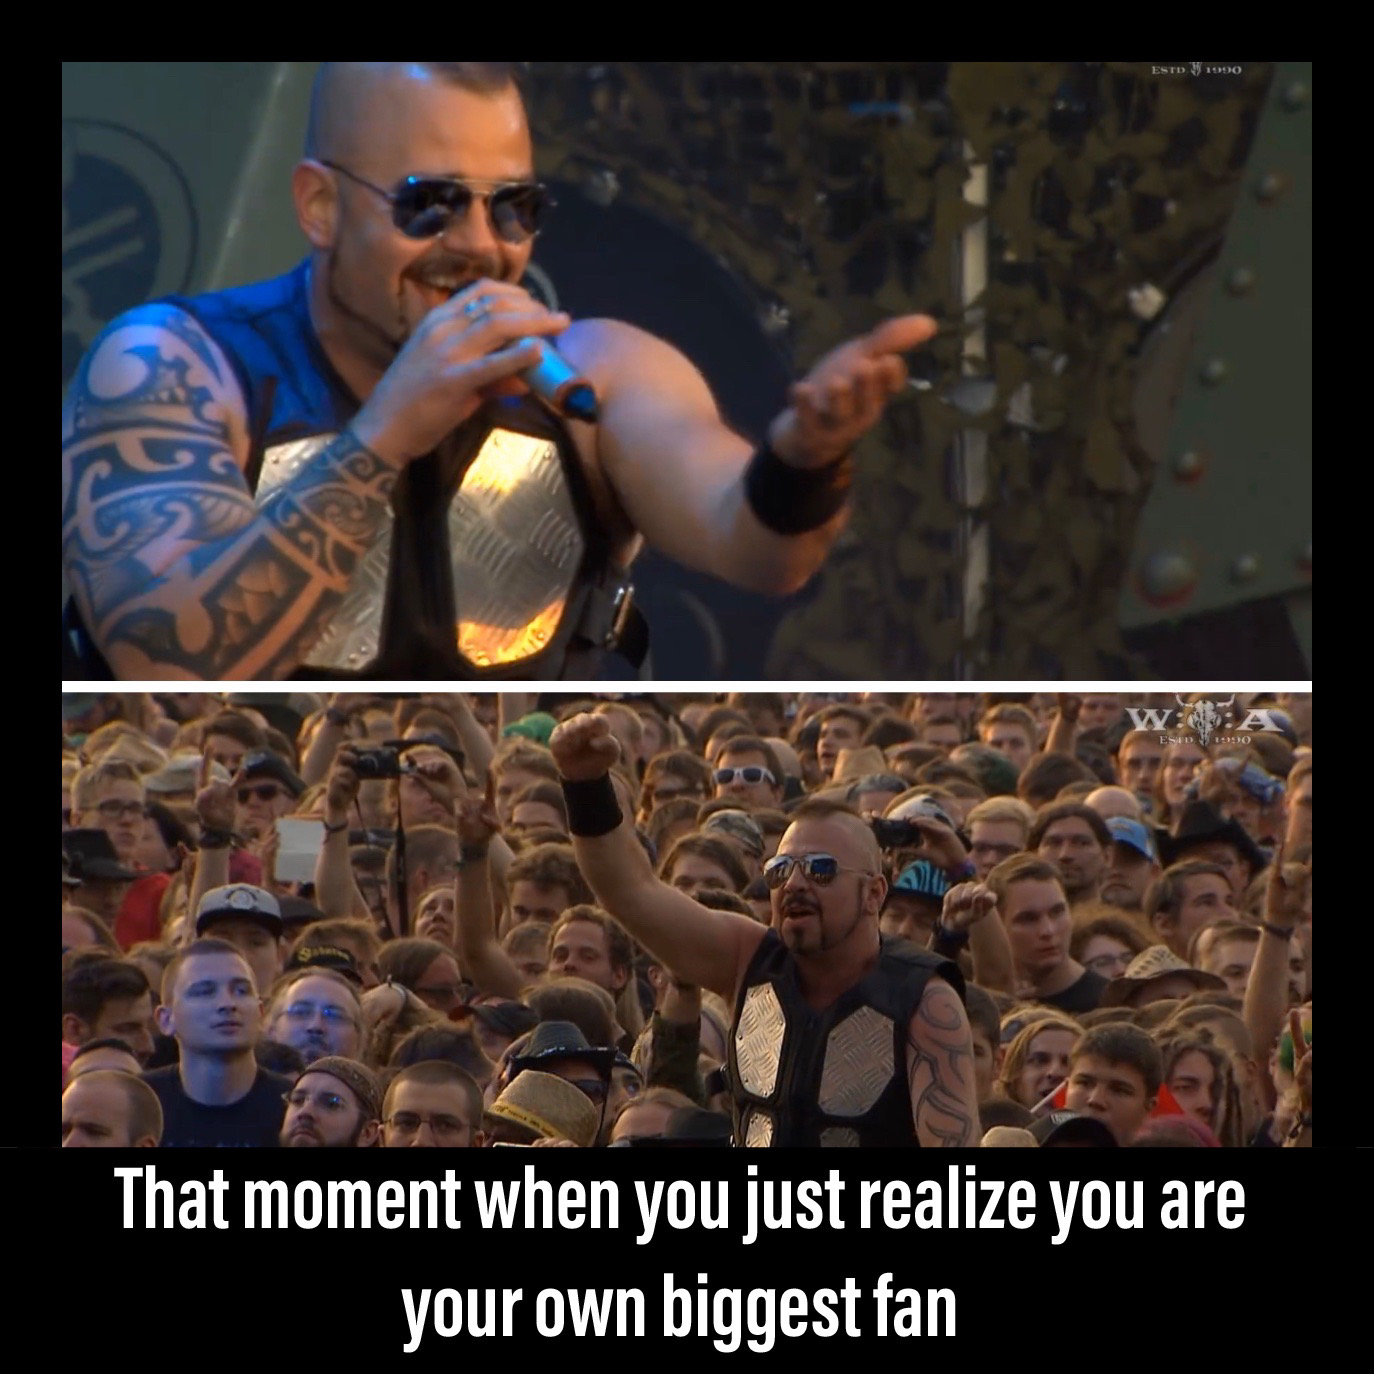 photo caption - That moment when you just realize you are your own biggest fan